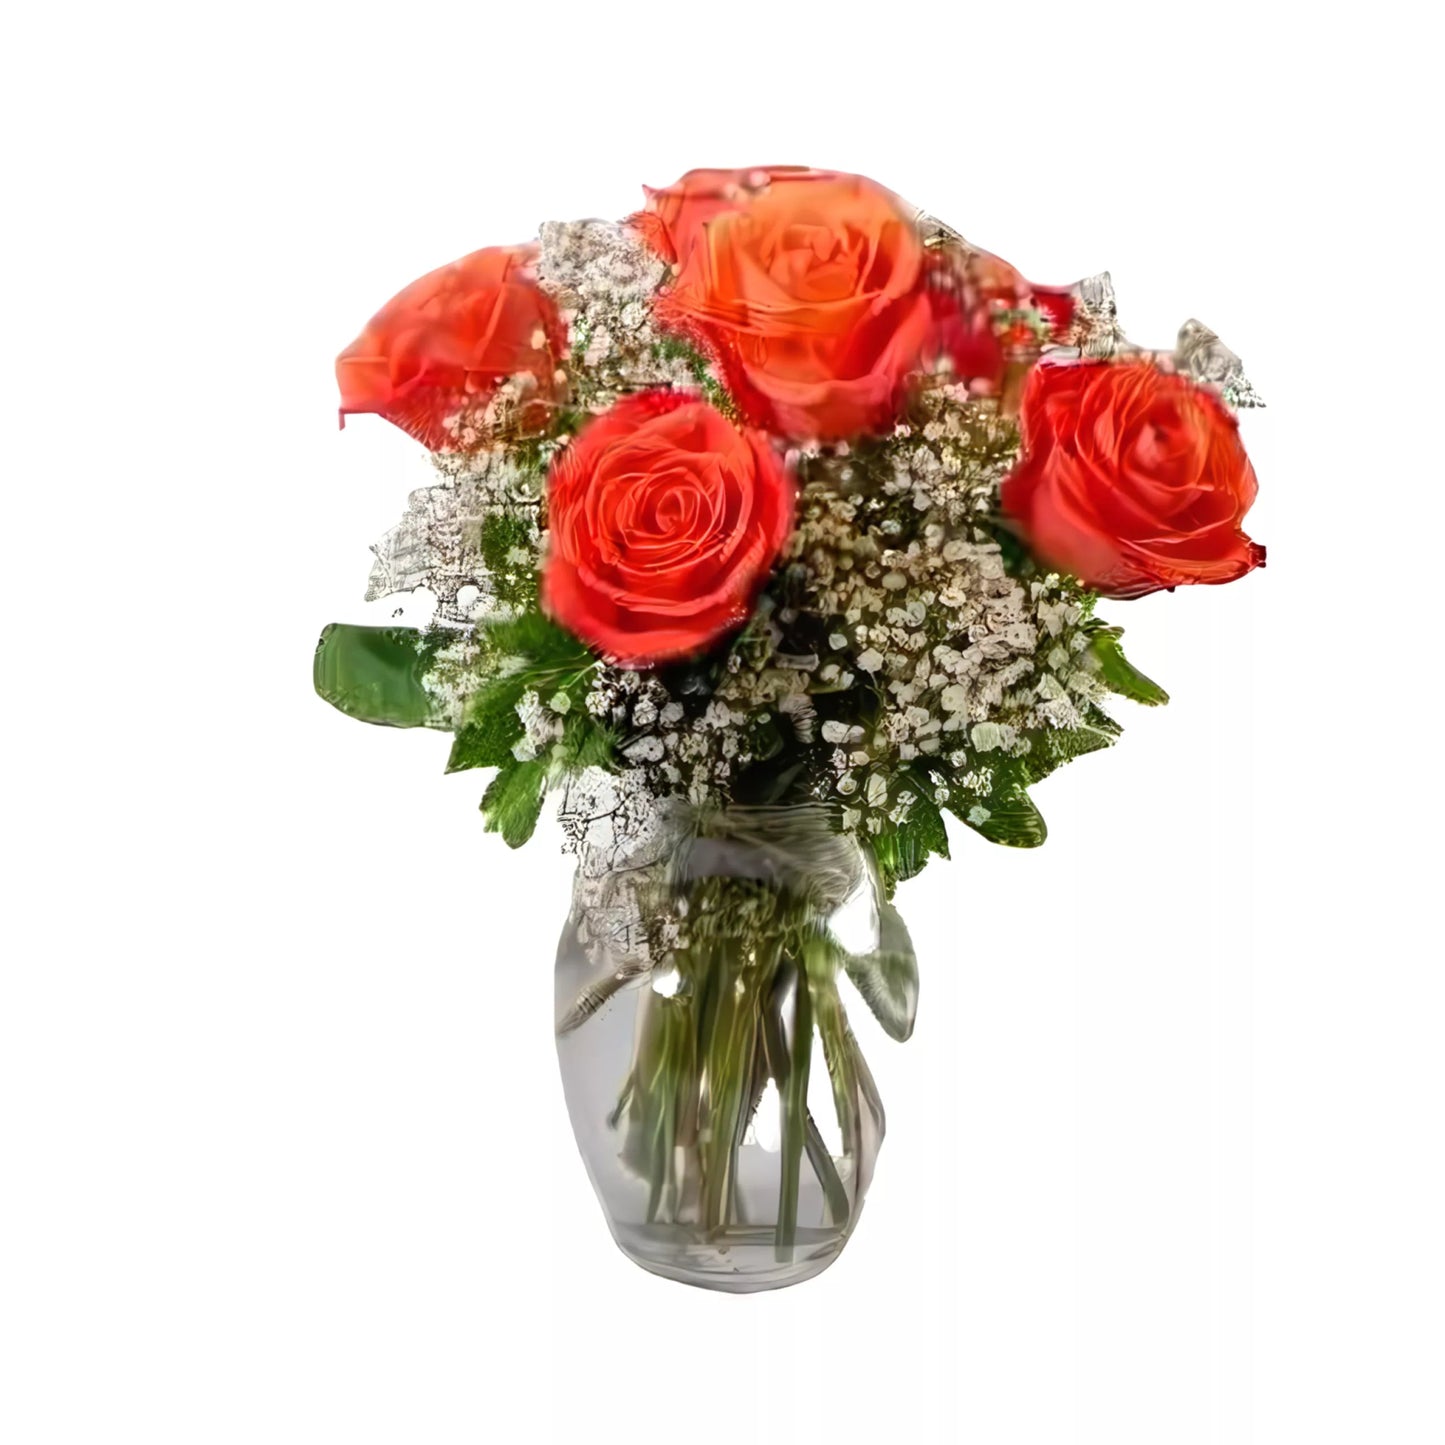 Love's Embrace Roses - Orange - Fresh Cut Flowers - Queens Flower Delivery